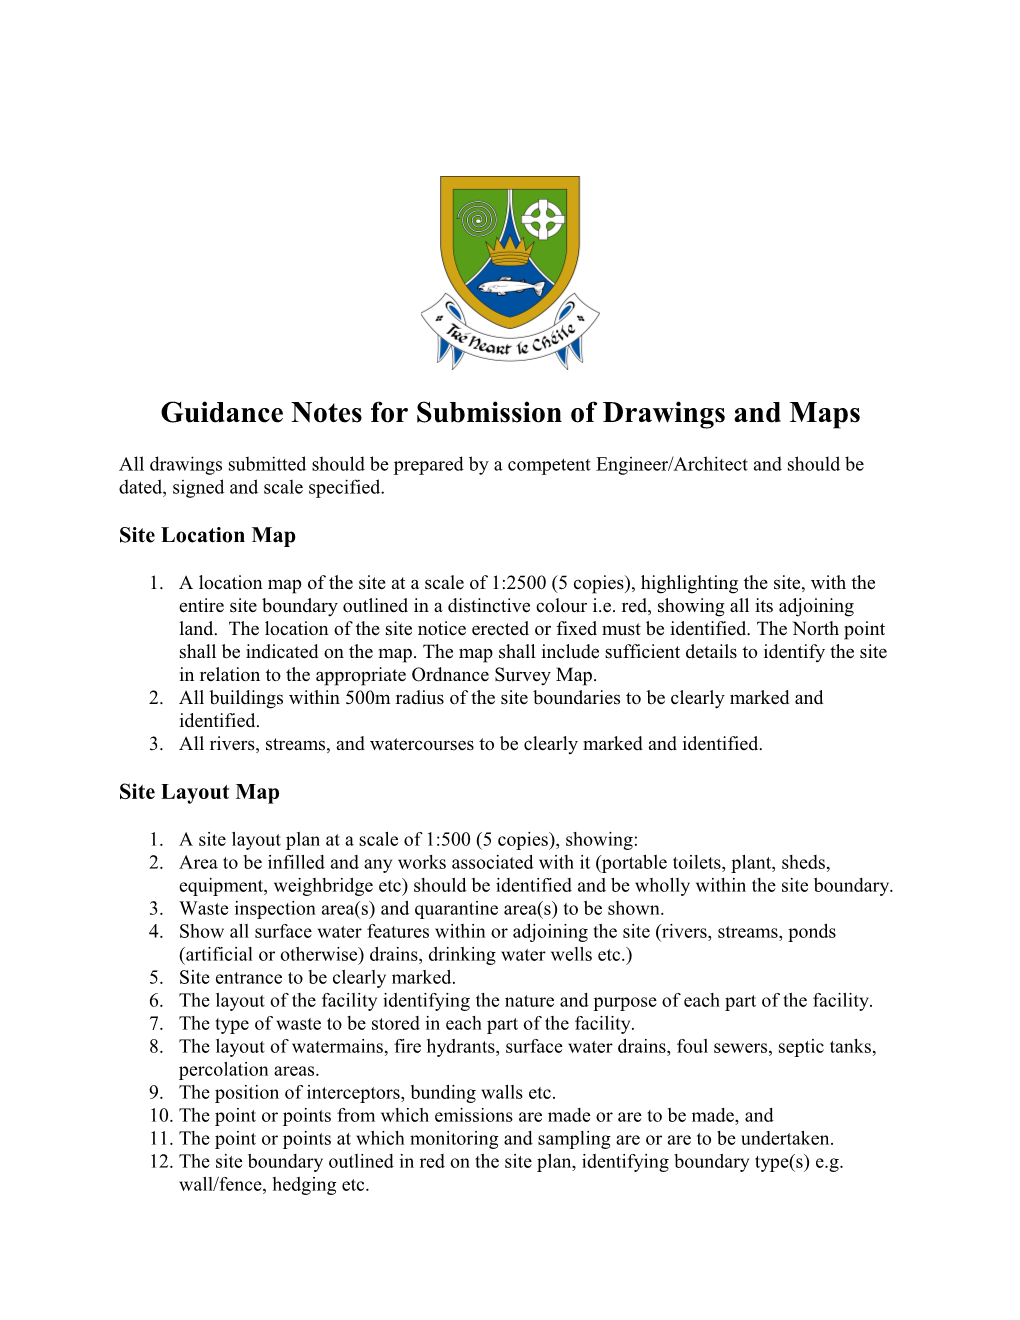 Guidance Notes for Submission of Drawings and Maps